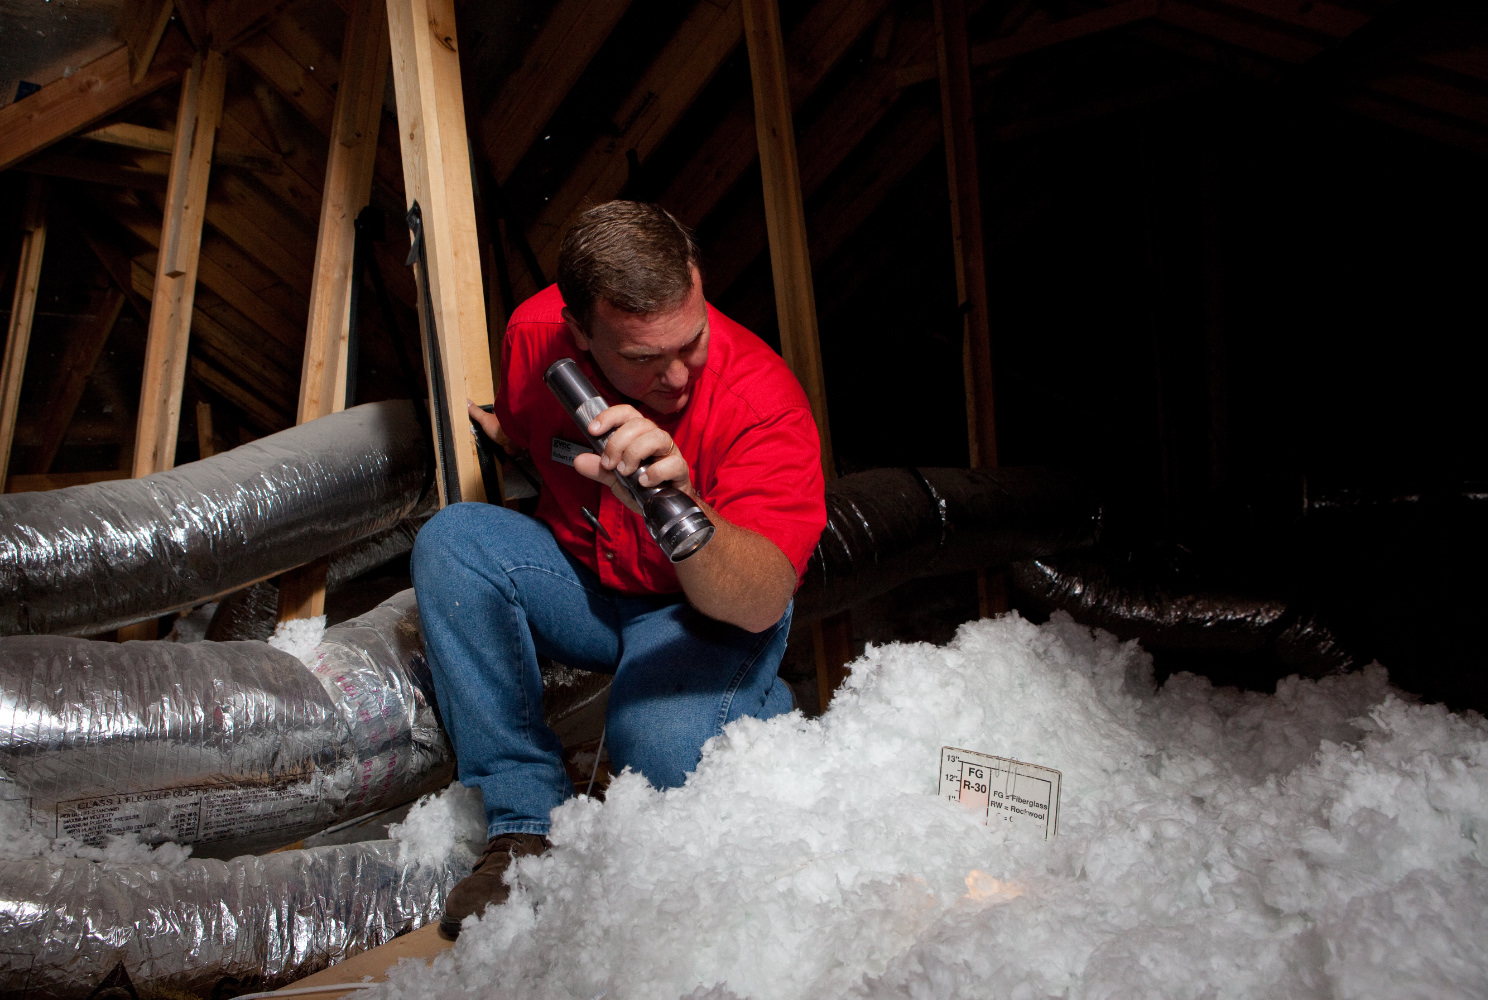 Man in attic with insulation